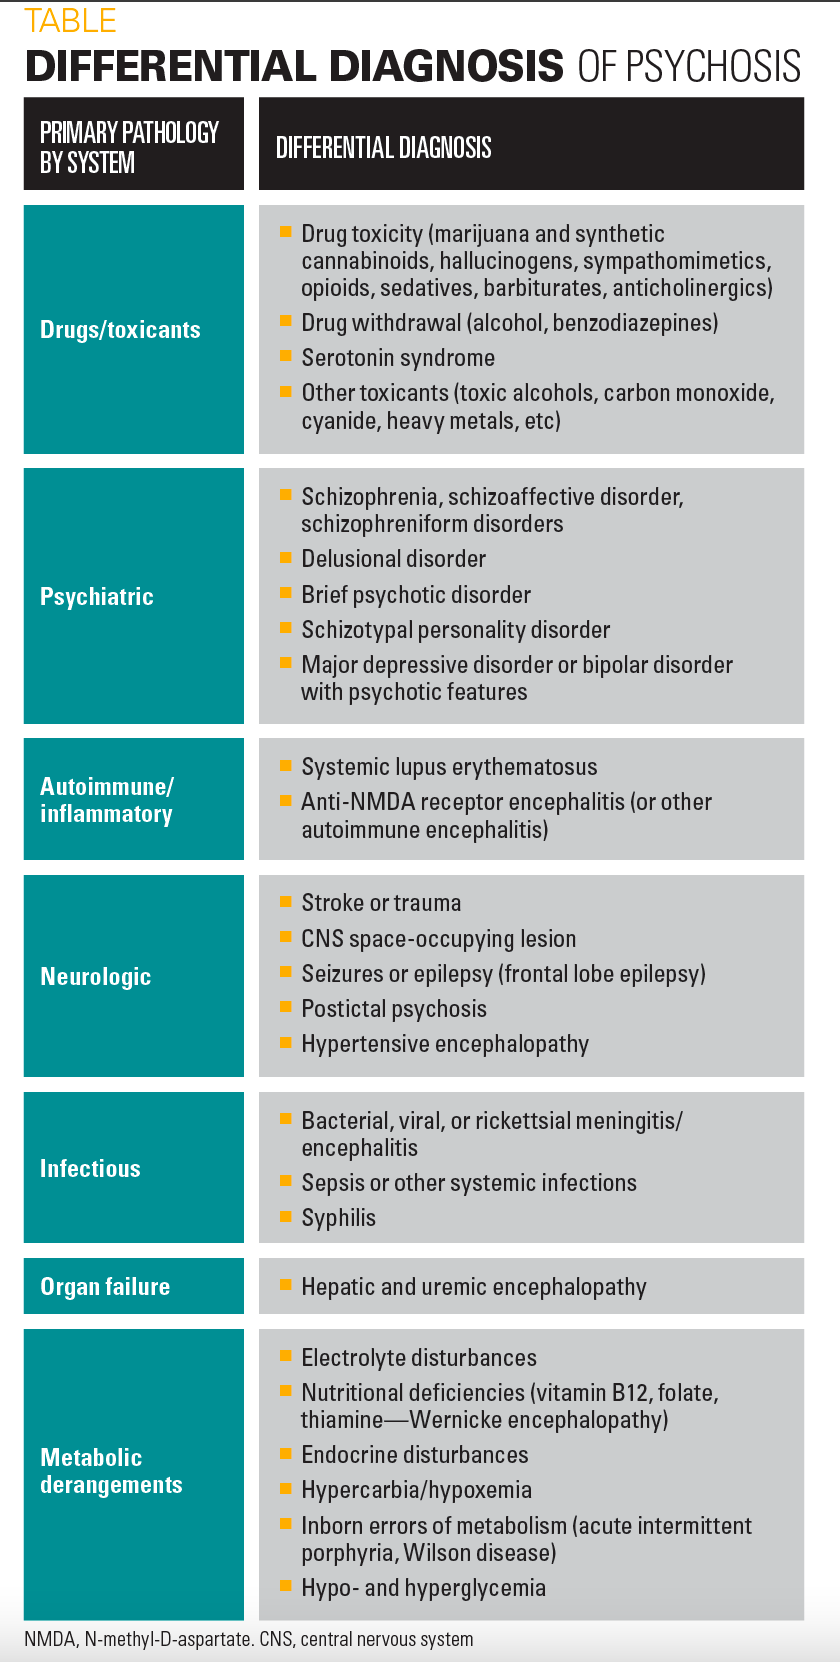 Differential diagnosis of psychosis